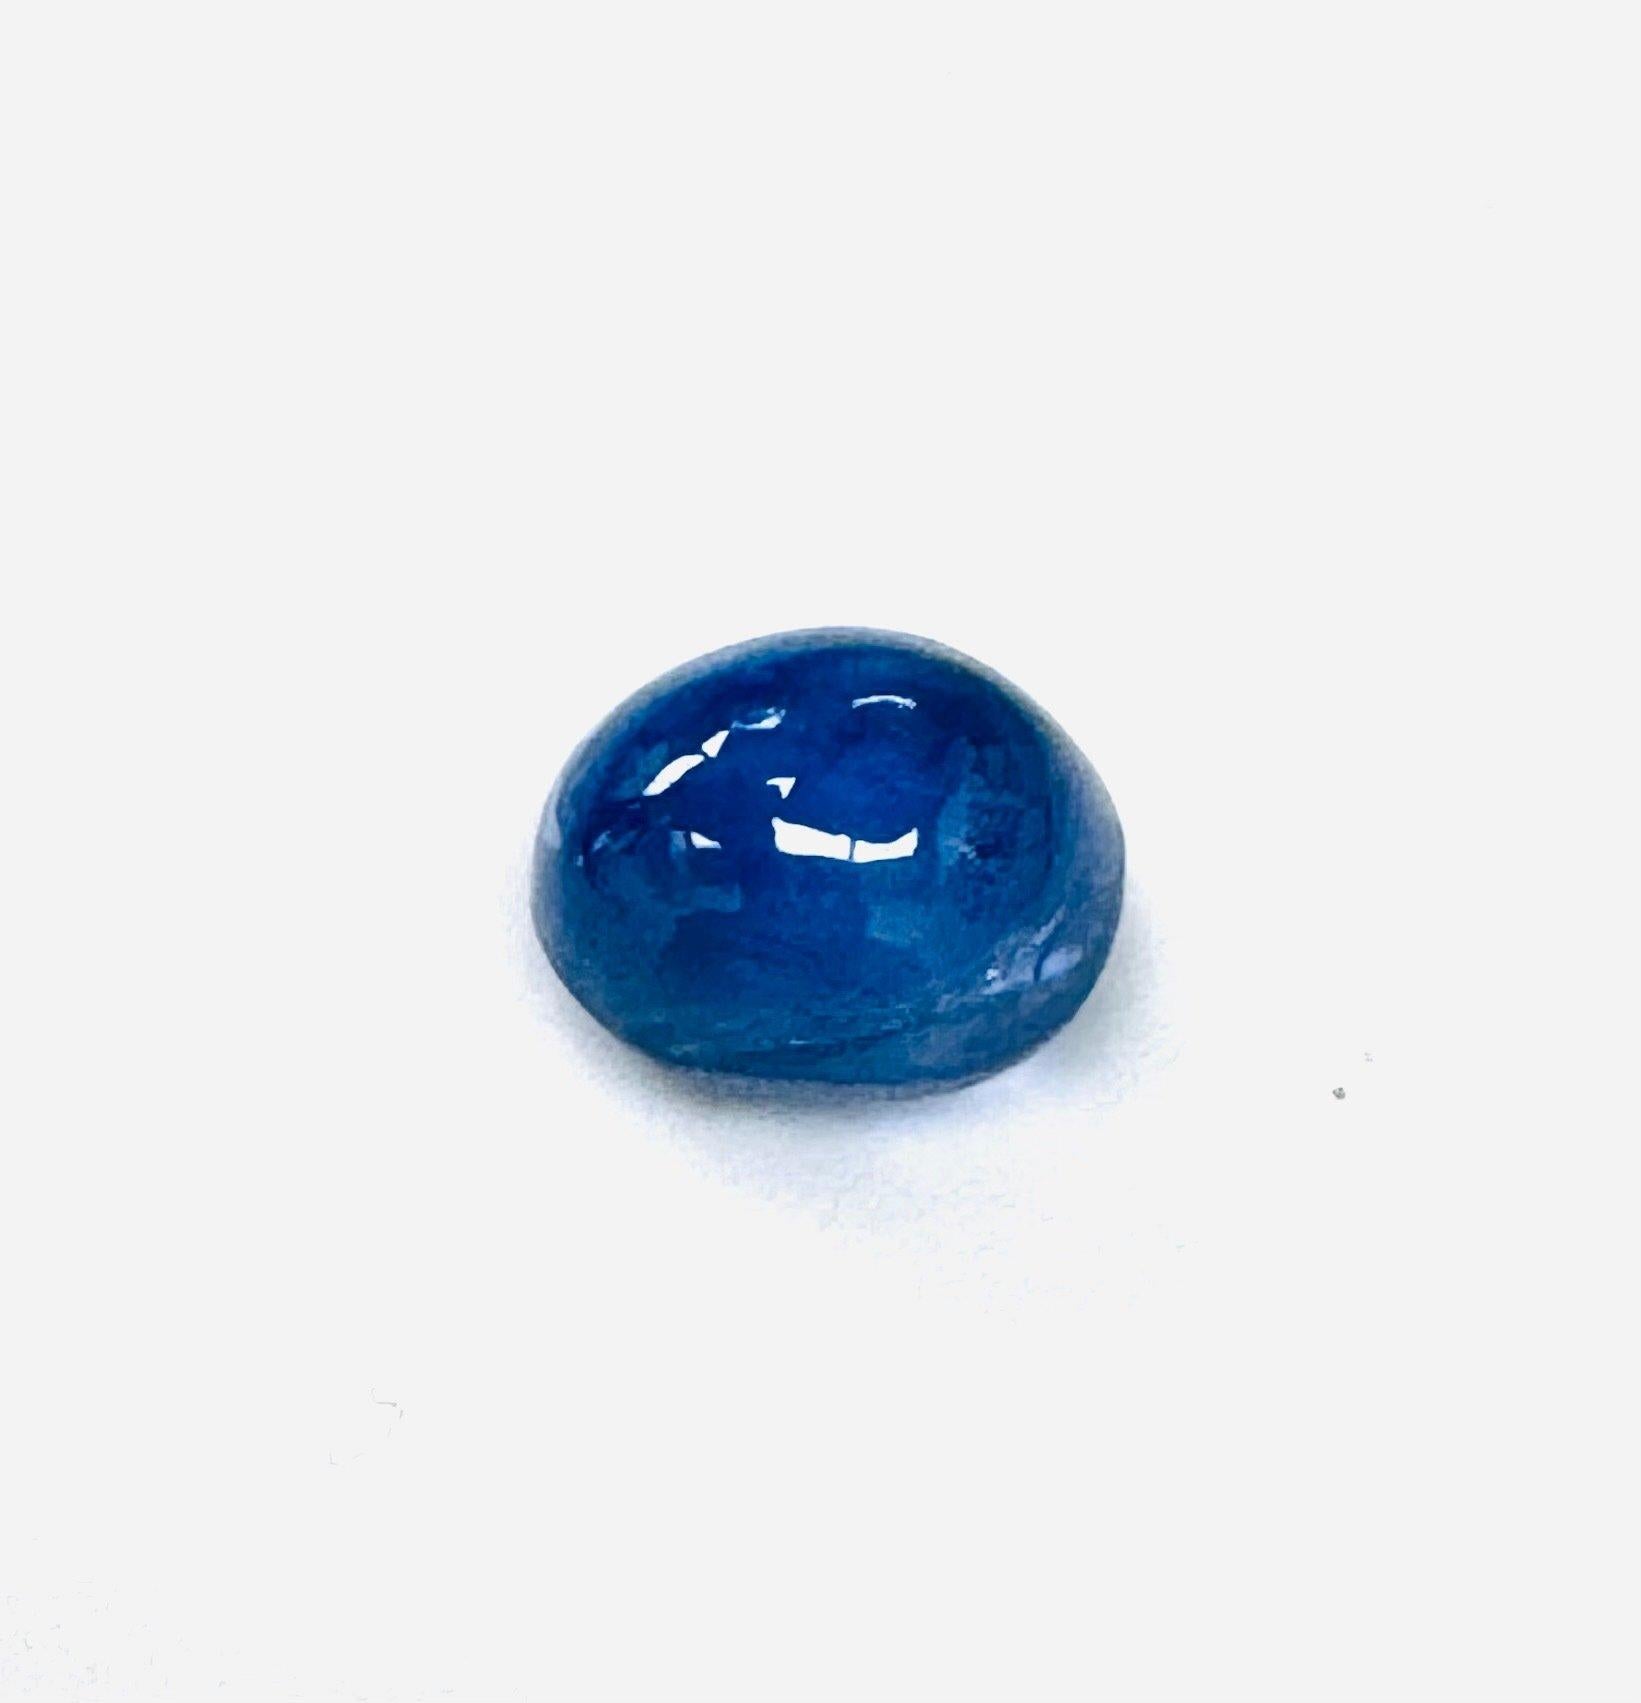 Fascinating 10.27ct Sapphire Gemstone - IGI Certified-Star Sapphire 

Presenting a breathtaking marvel of nature, this 10.27 sapphire embodies serene beauty with its enchanting light blue hue. For utmost protection and peace of mind, this precious